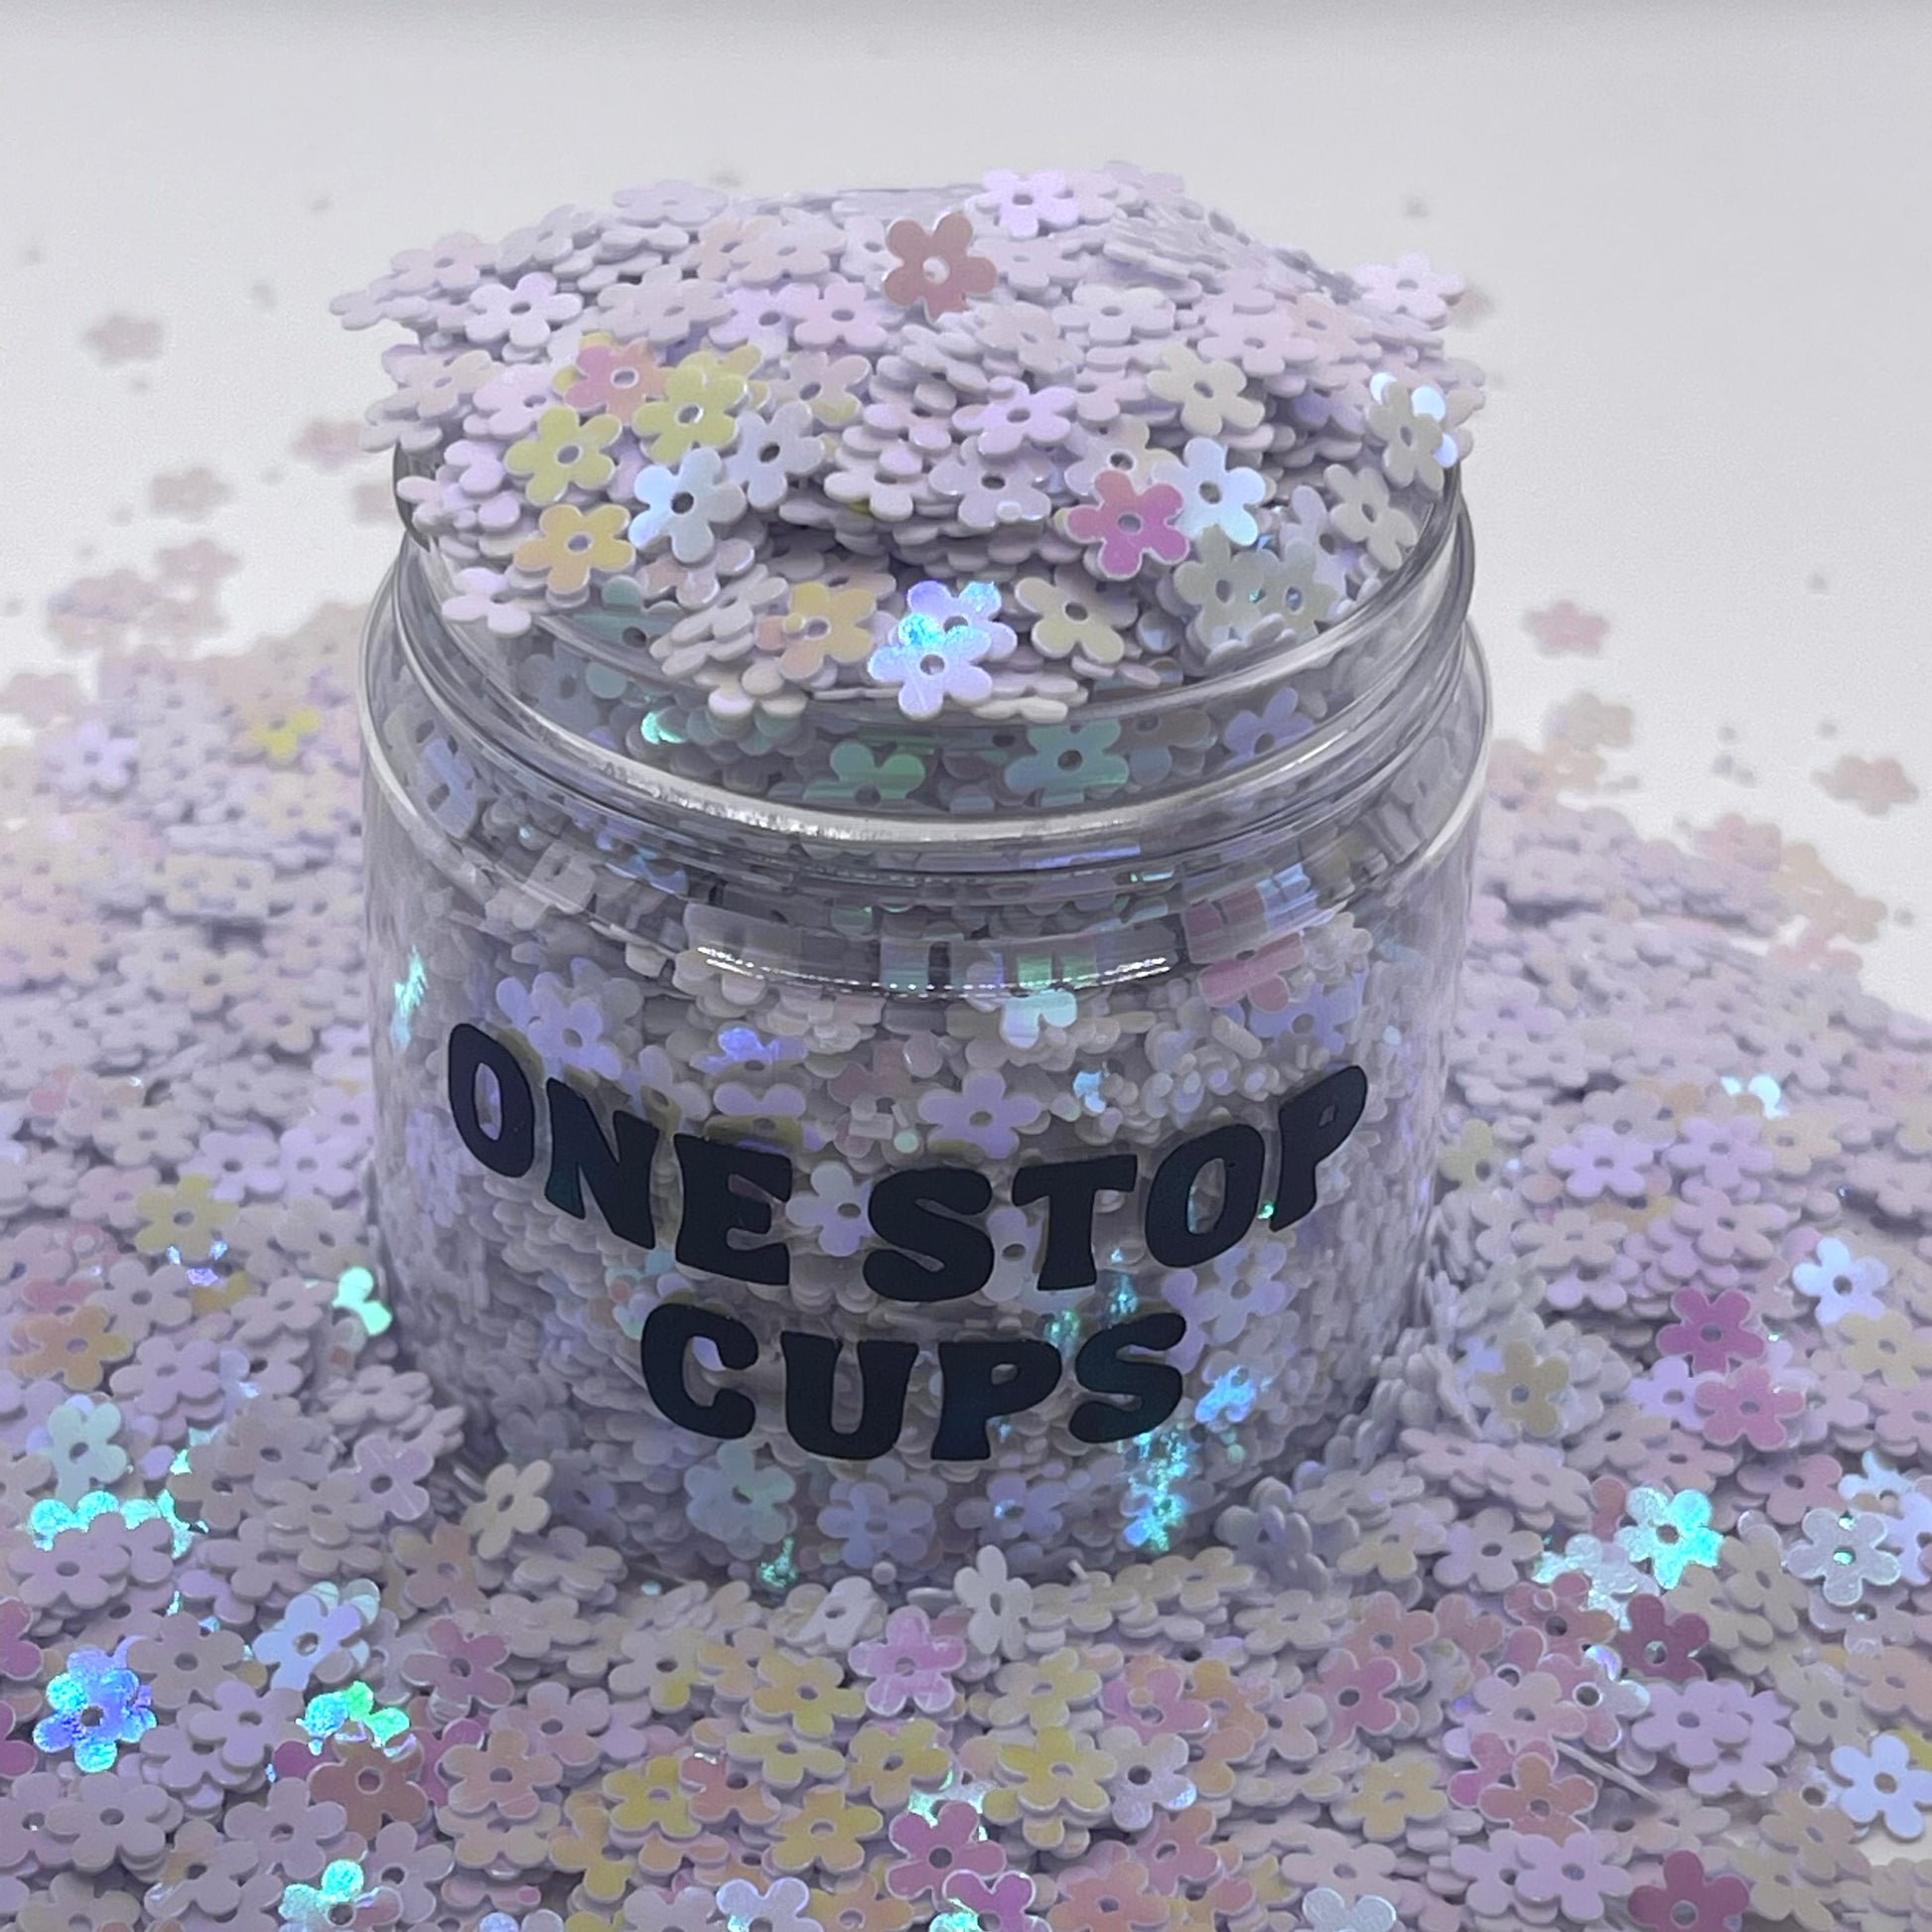 White Flower Shaped Glitter – One Stop Cups